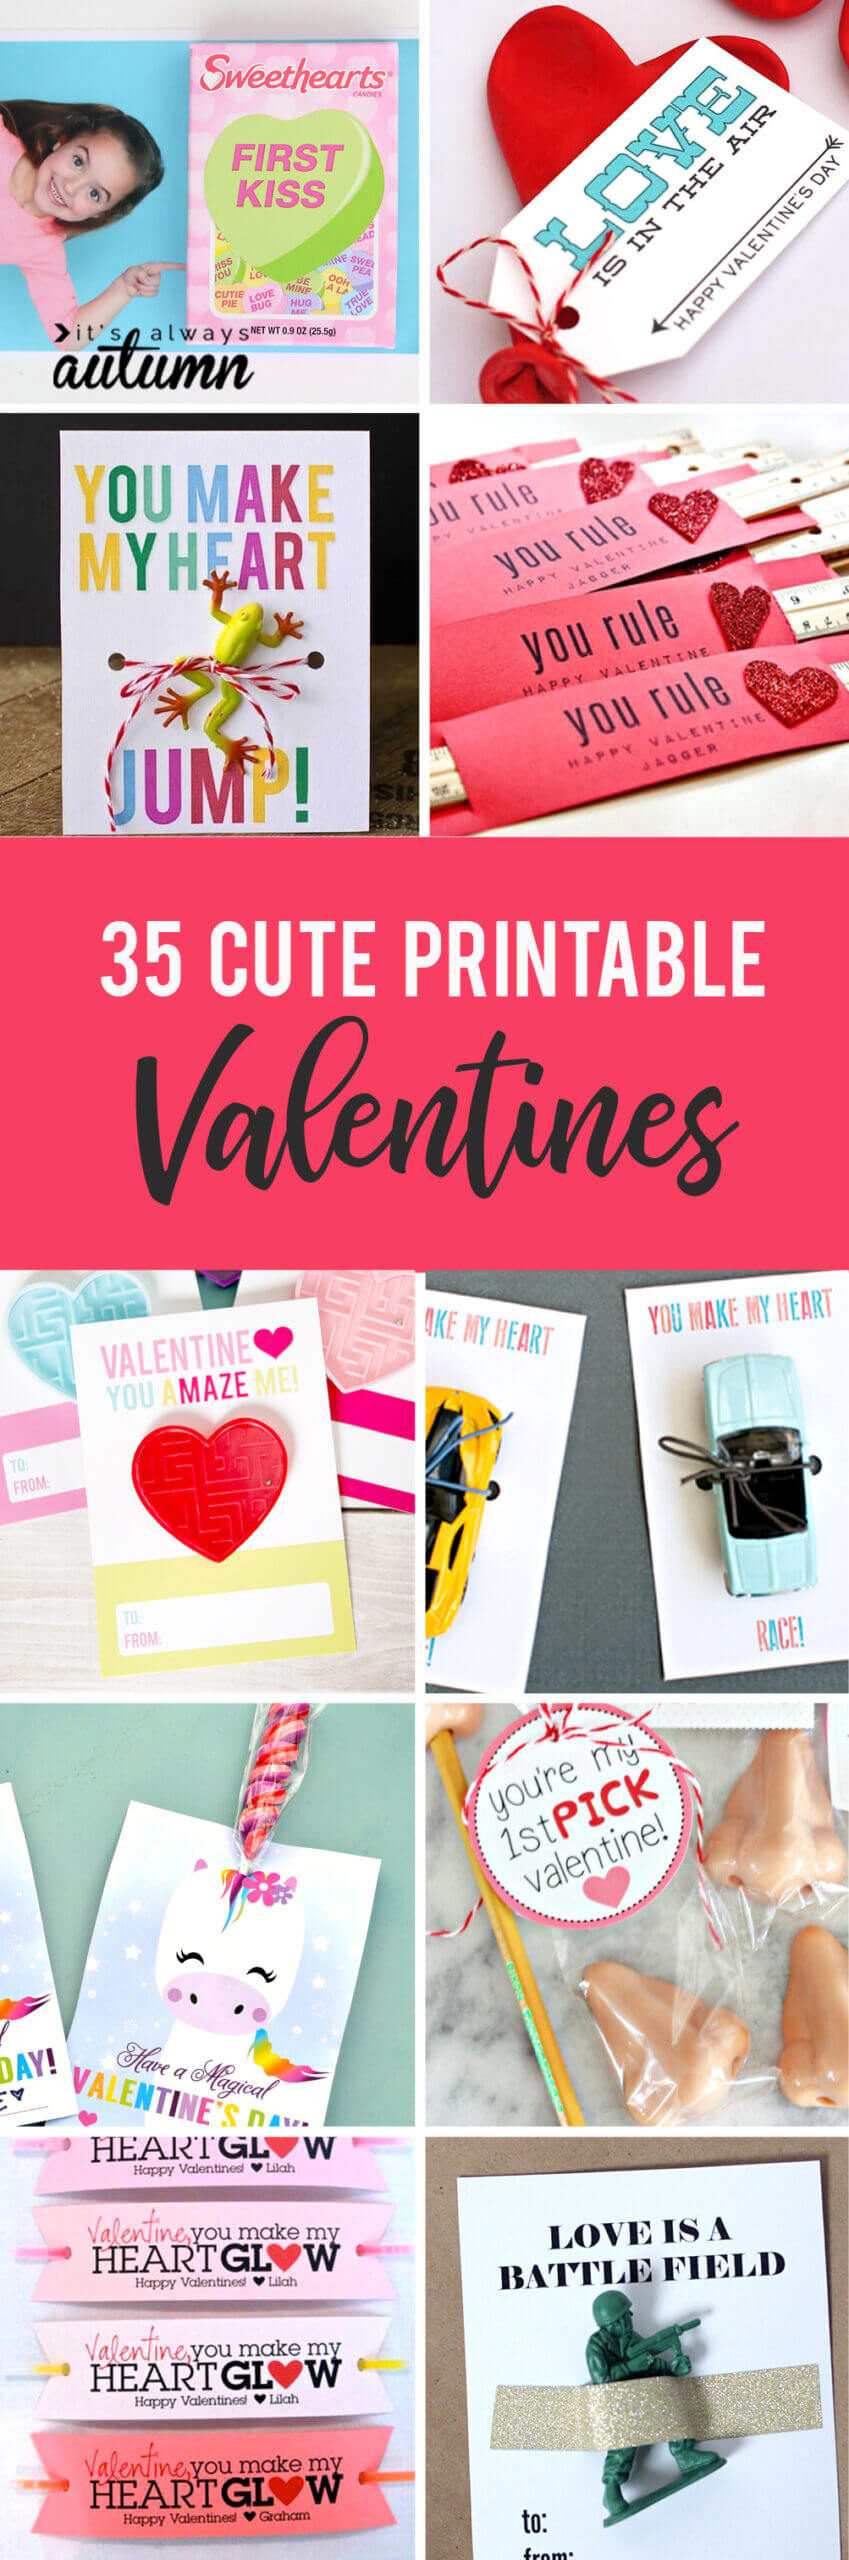 35 Adorable Diy Valentine's Cards To Print At Home For Your With Regard To Valentine Card Template For Kids